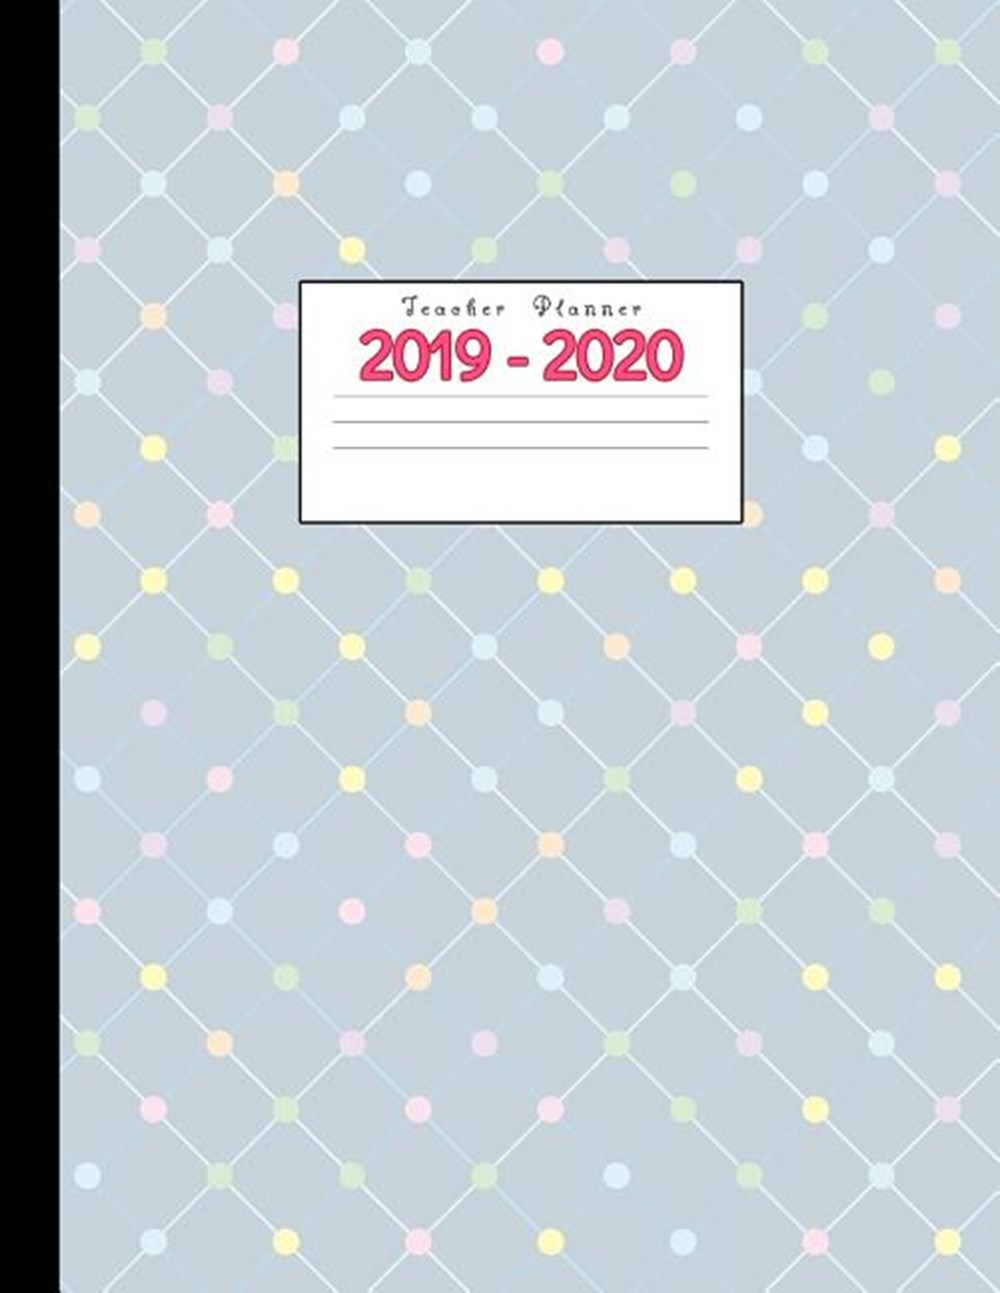 Teacher Planner 2019-2020 Academic Planners Calendar Daily, Weekly and Monthly July 2019- June 2020 